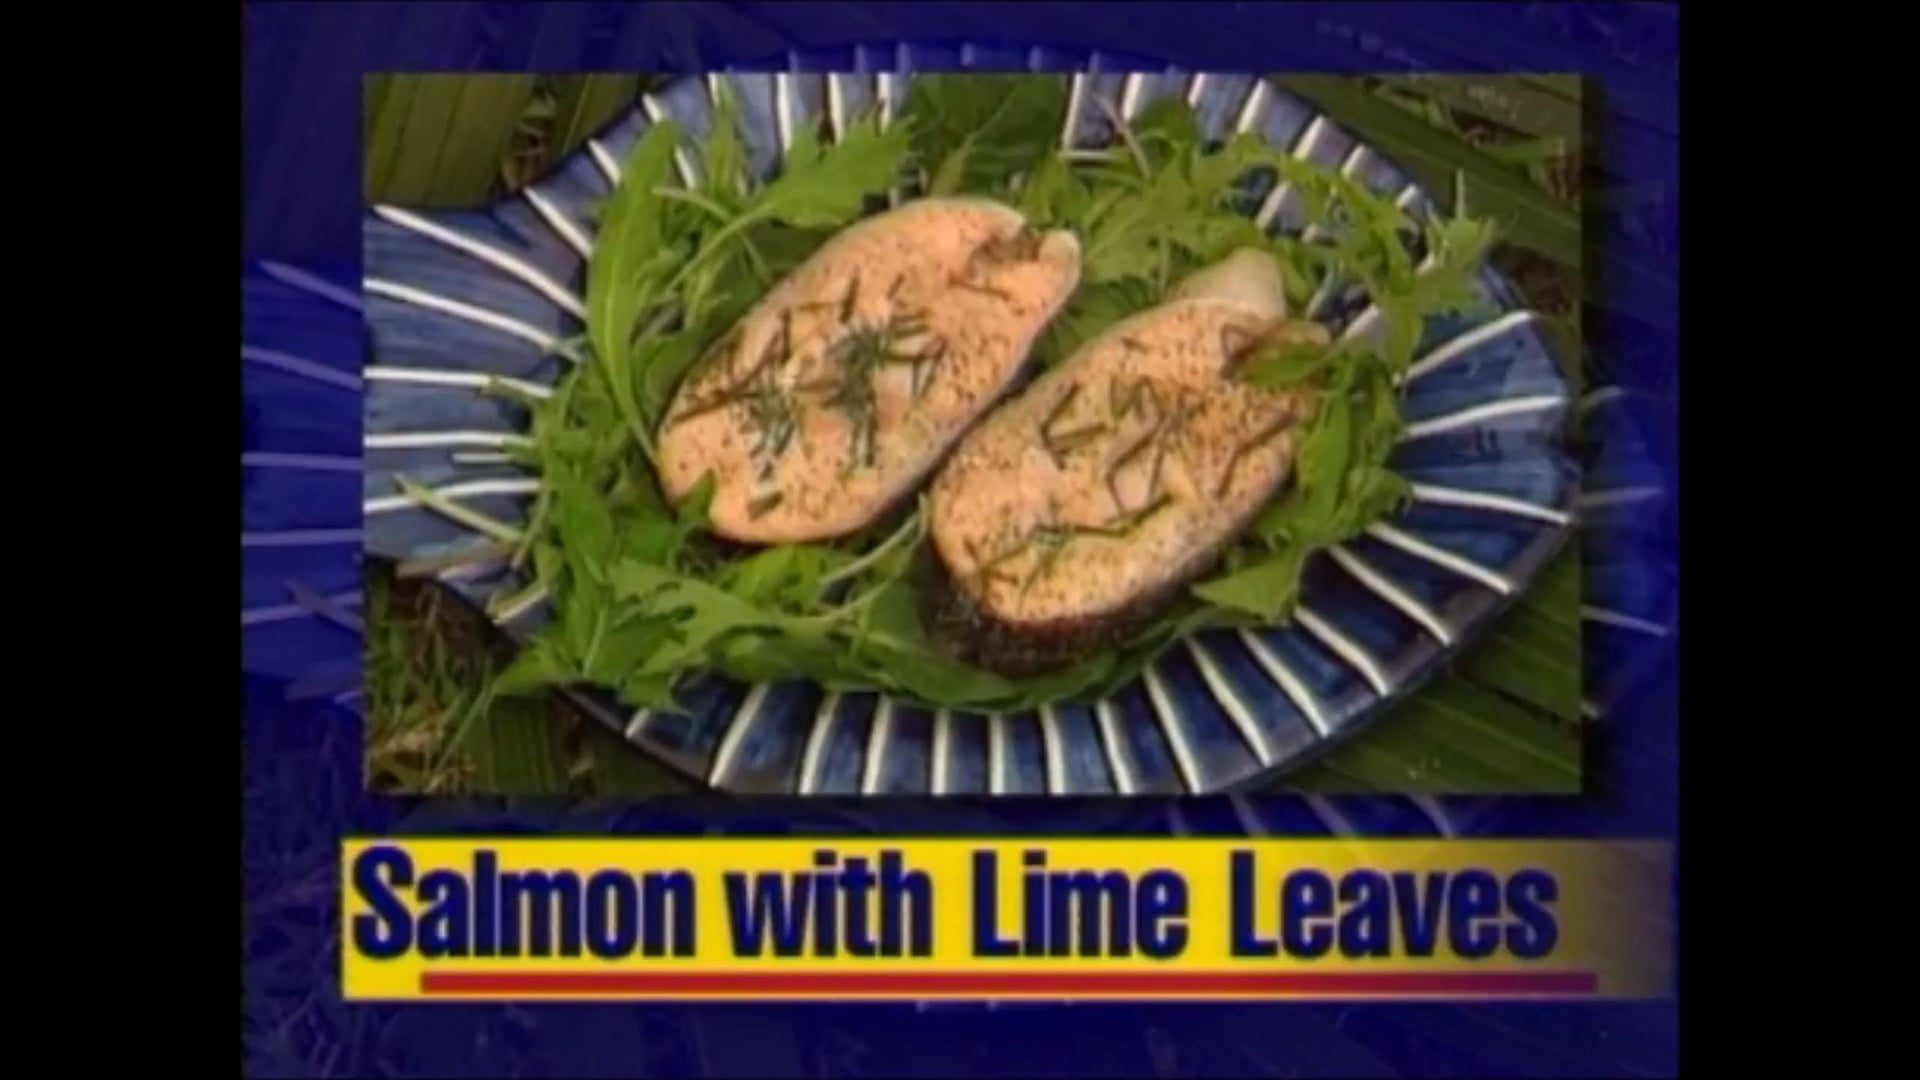 Salmom with Lime Leaves